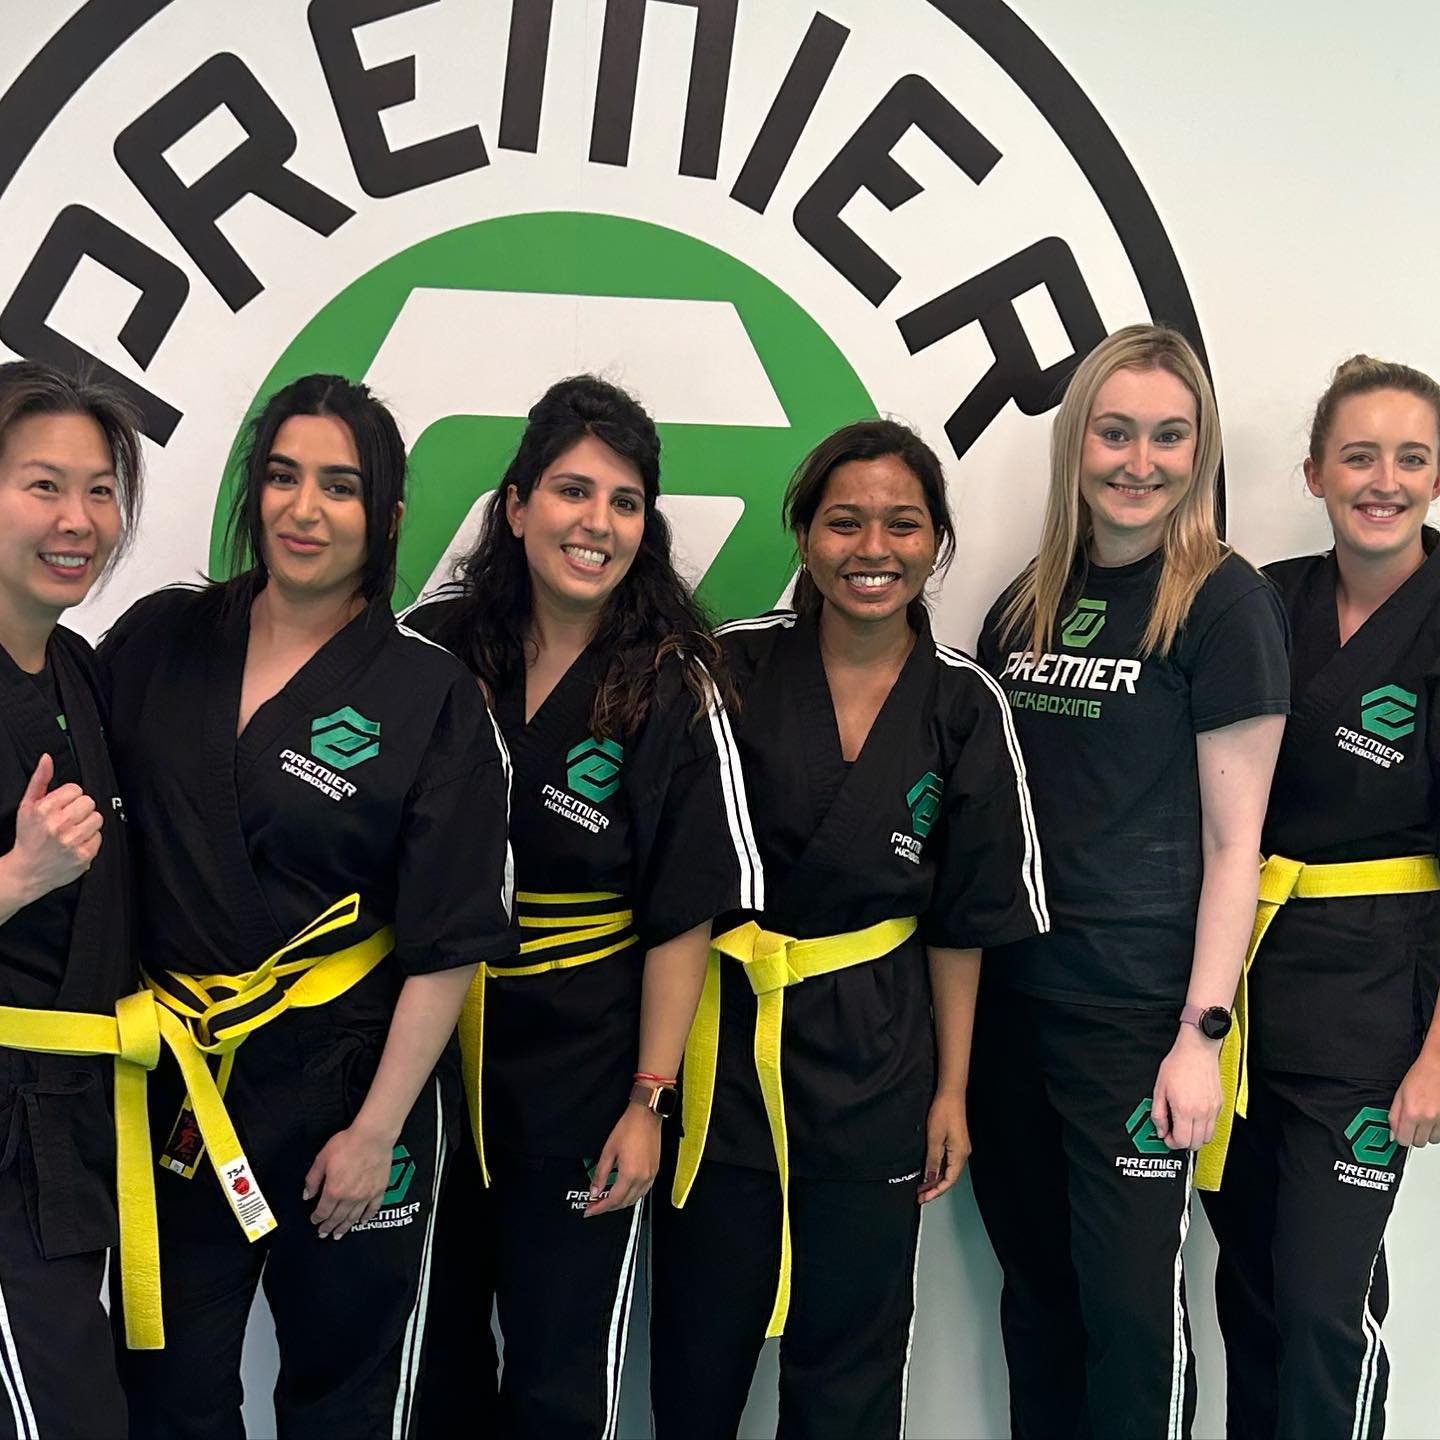 Ruislip Manor grading. Congratulations to our Fantastic team of graders, you have made us all so proud with your dedication and focus on training and improving. 1 step closer to black belt. We look forward to seeing you back at training for the next 